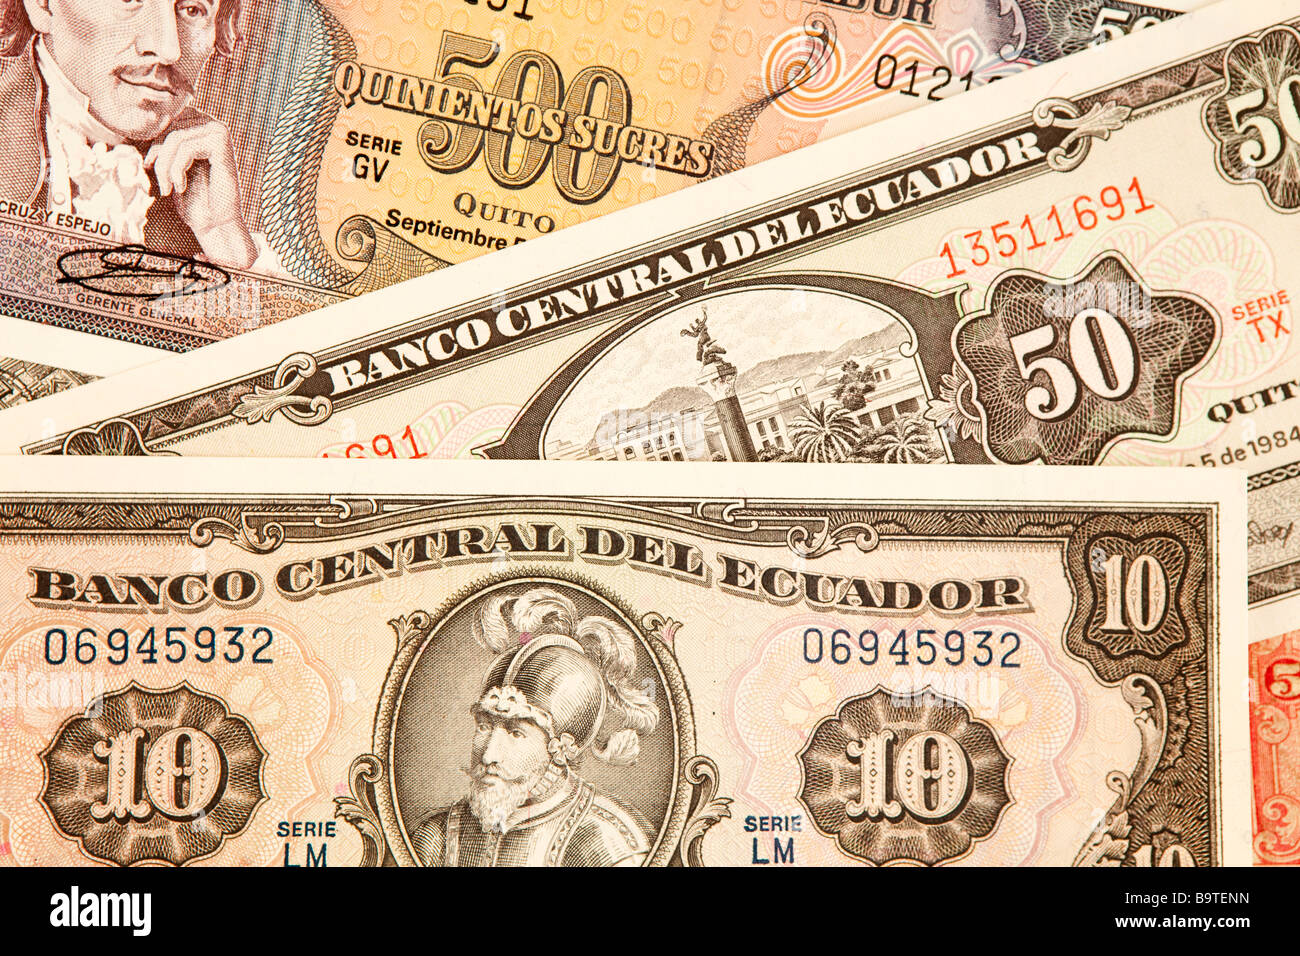 Money currency detail of Ecuador 10 50 and 500 sucre banknotes Stock Photo